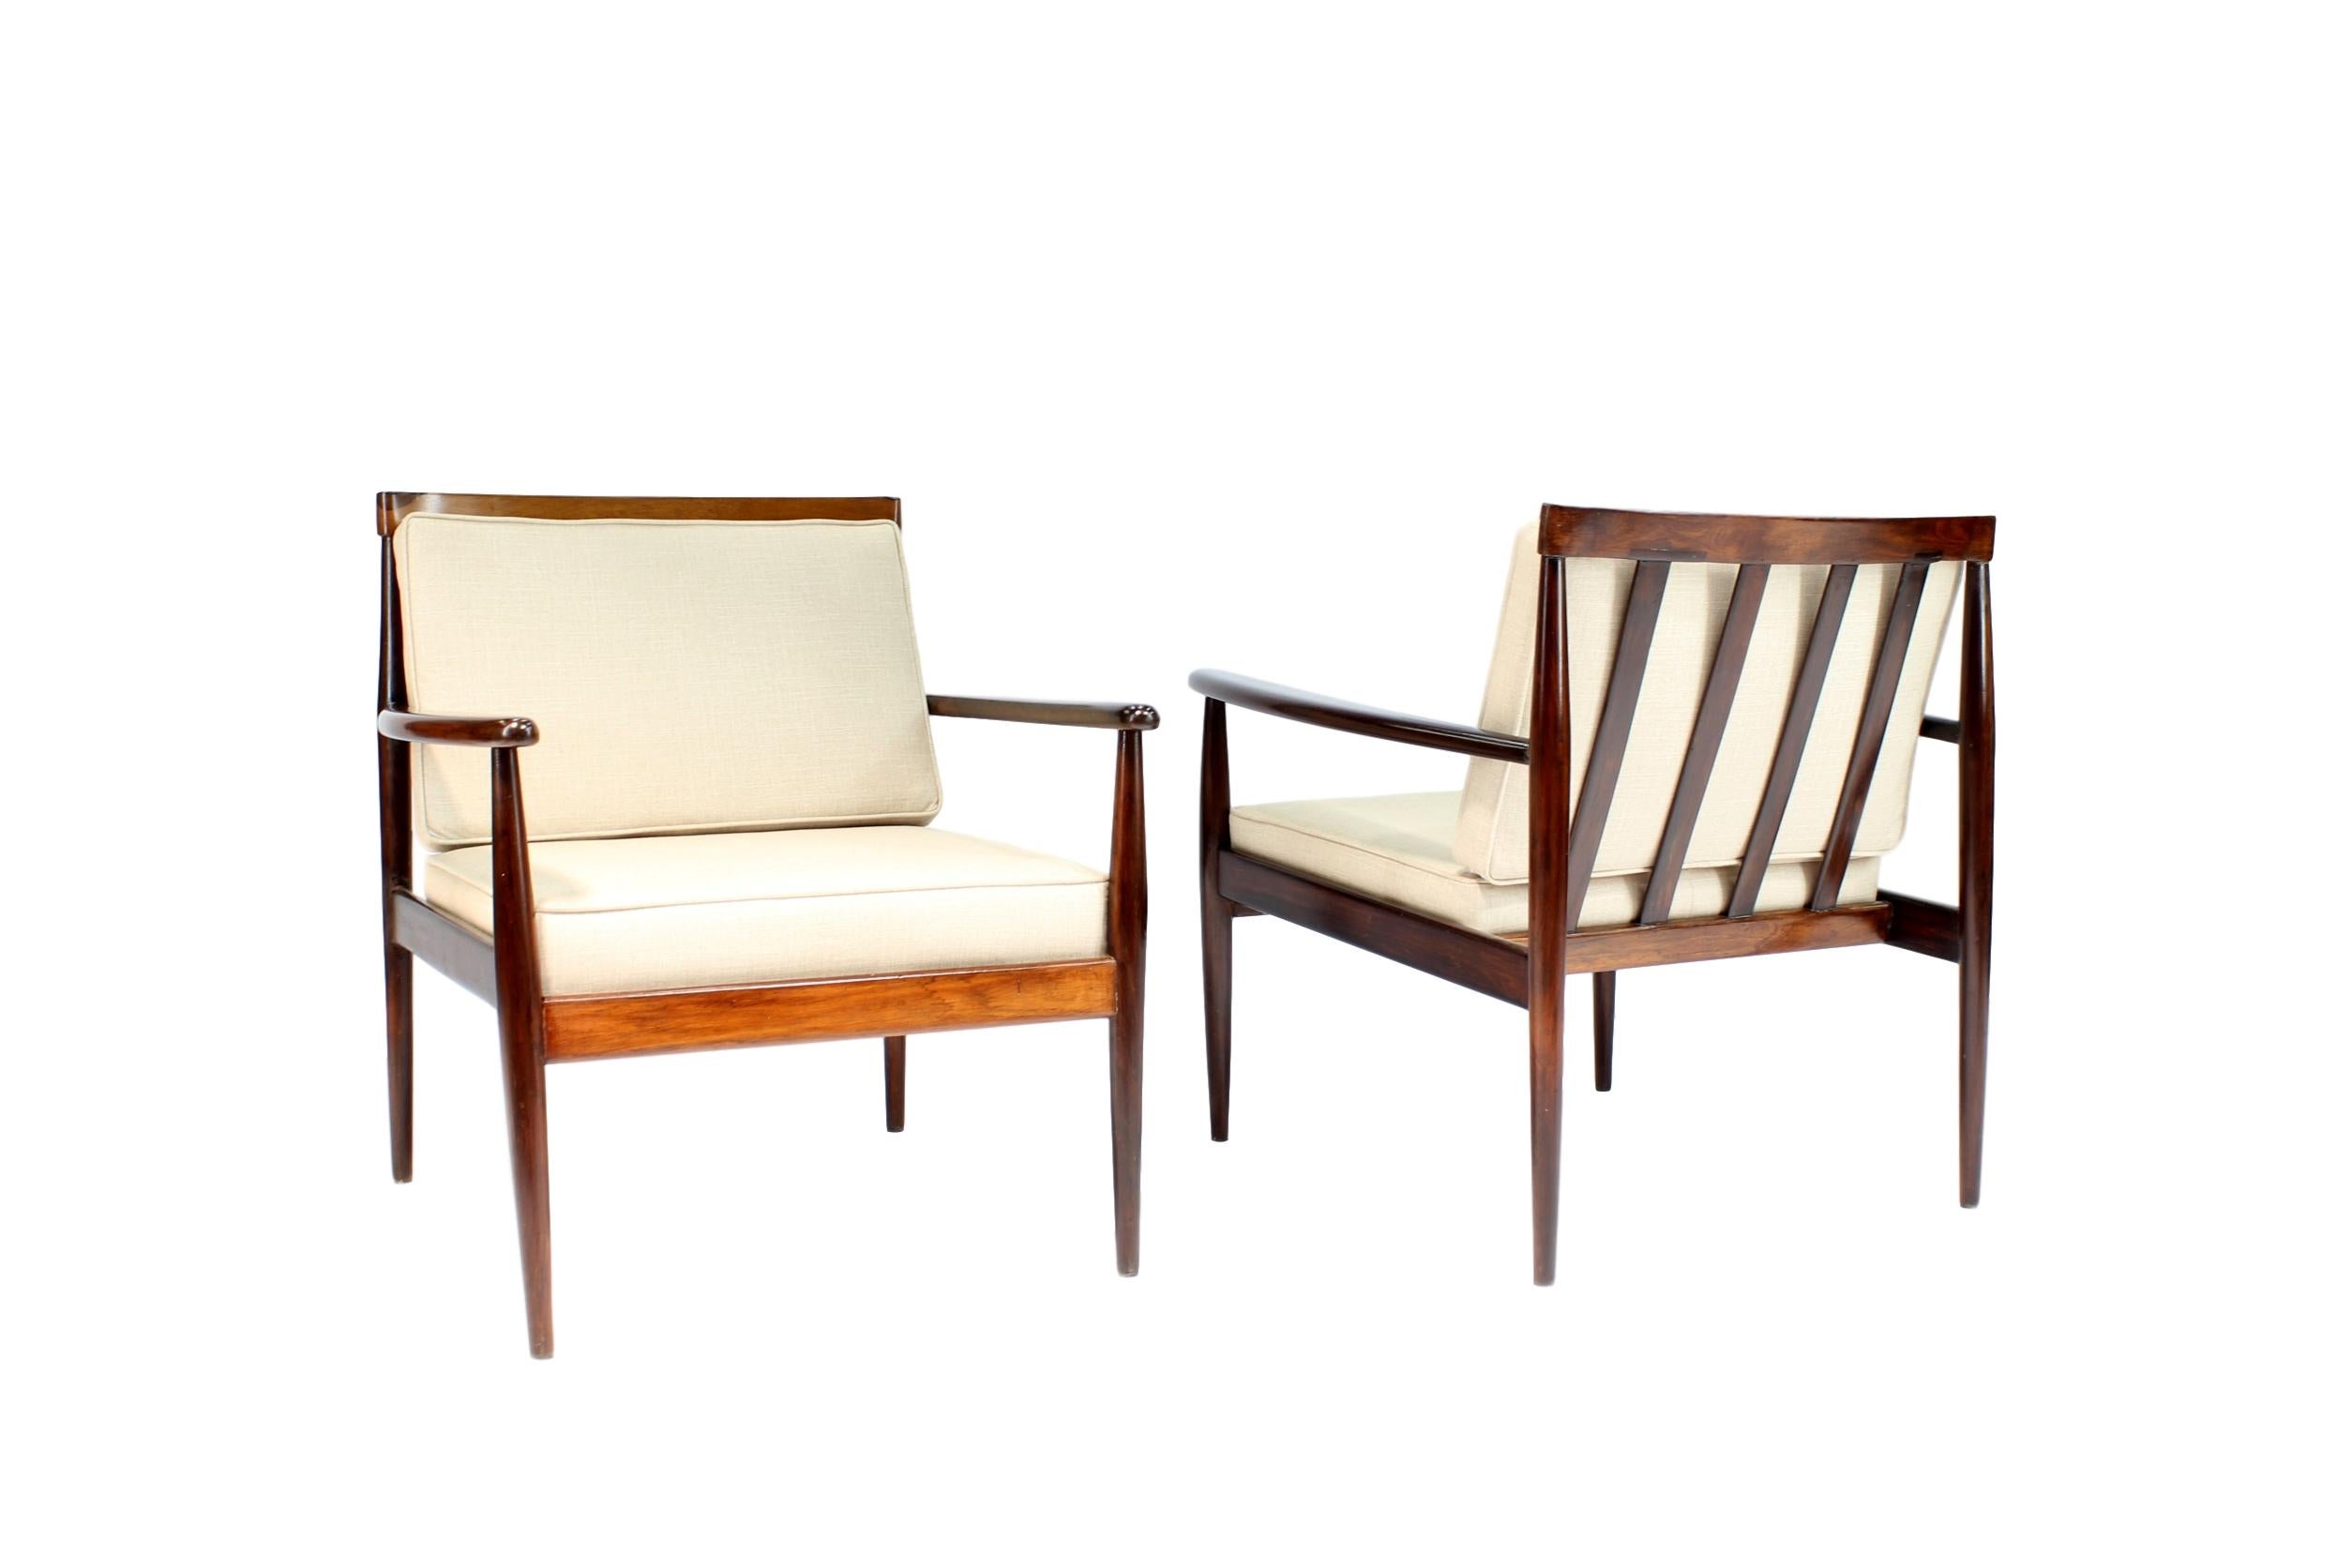 Before acquired by a Brazilian journalist, this set of iconic armchairs belonged to Largo do Boticario, a historic estate in Rio de Janeiro, Brazil. AccorHotels acquired the property last year (2018), and part of the furniture inventory has been